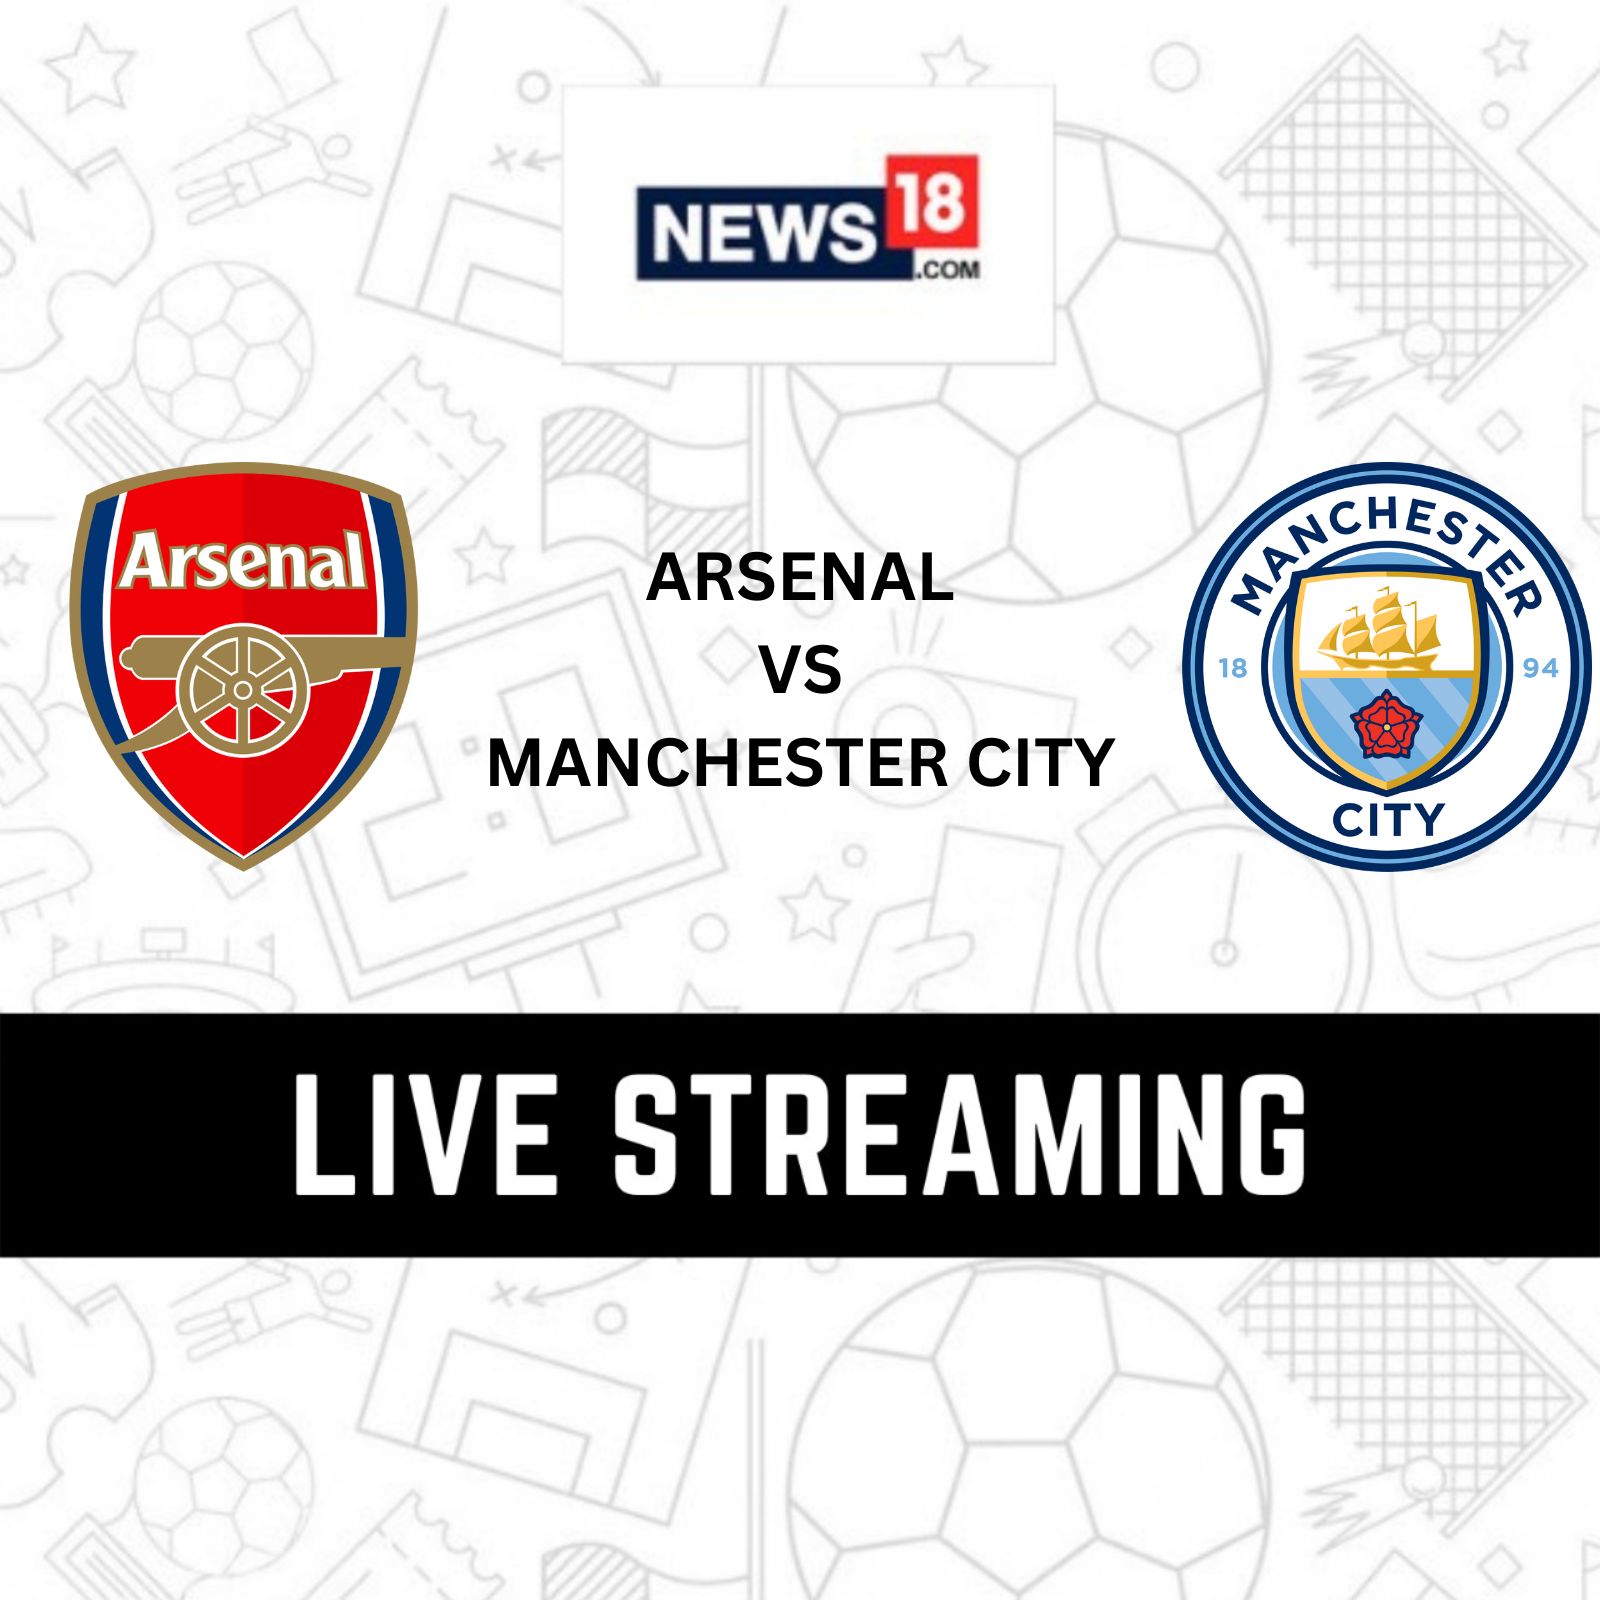 Arsenal vs Manchester City Premier League Live Streaming: When and Where to Watch  Arsenal vs Manchester City Live?